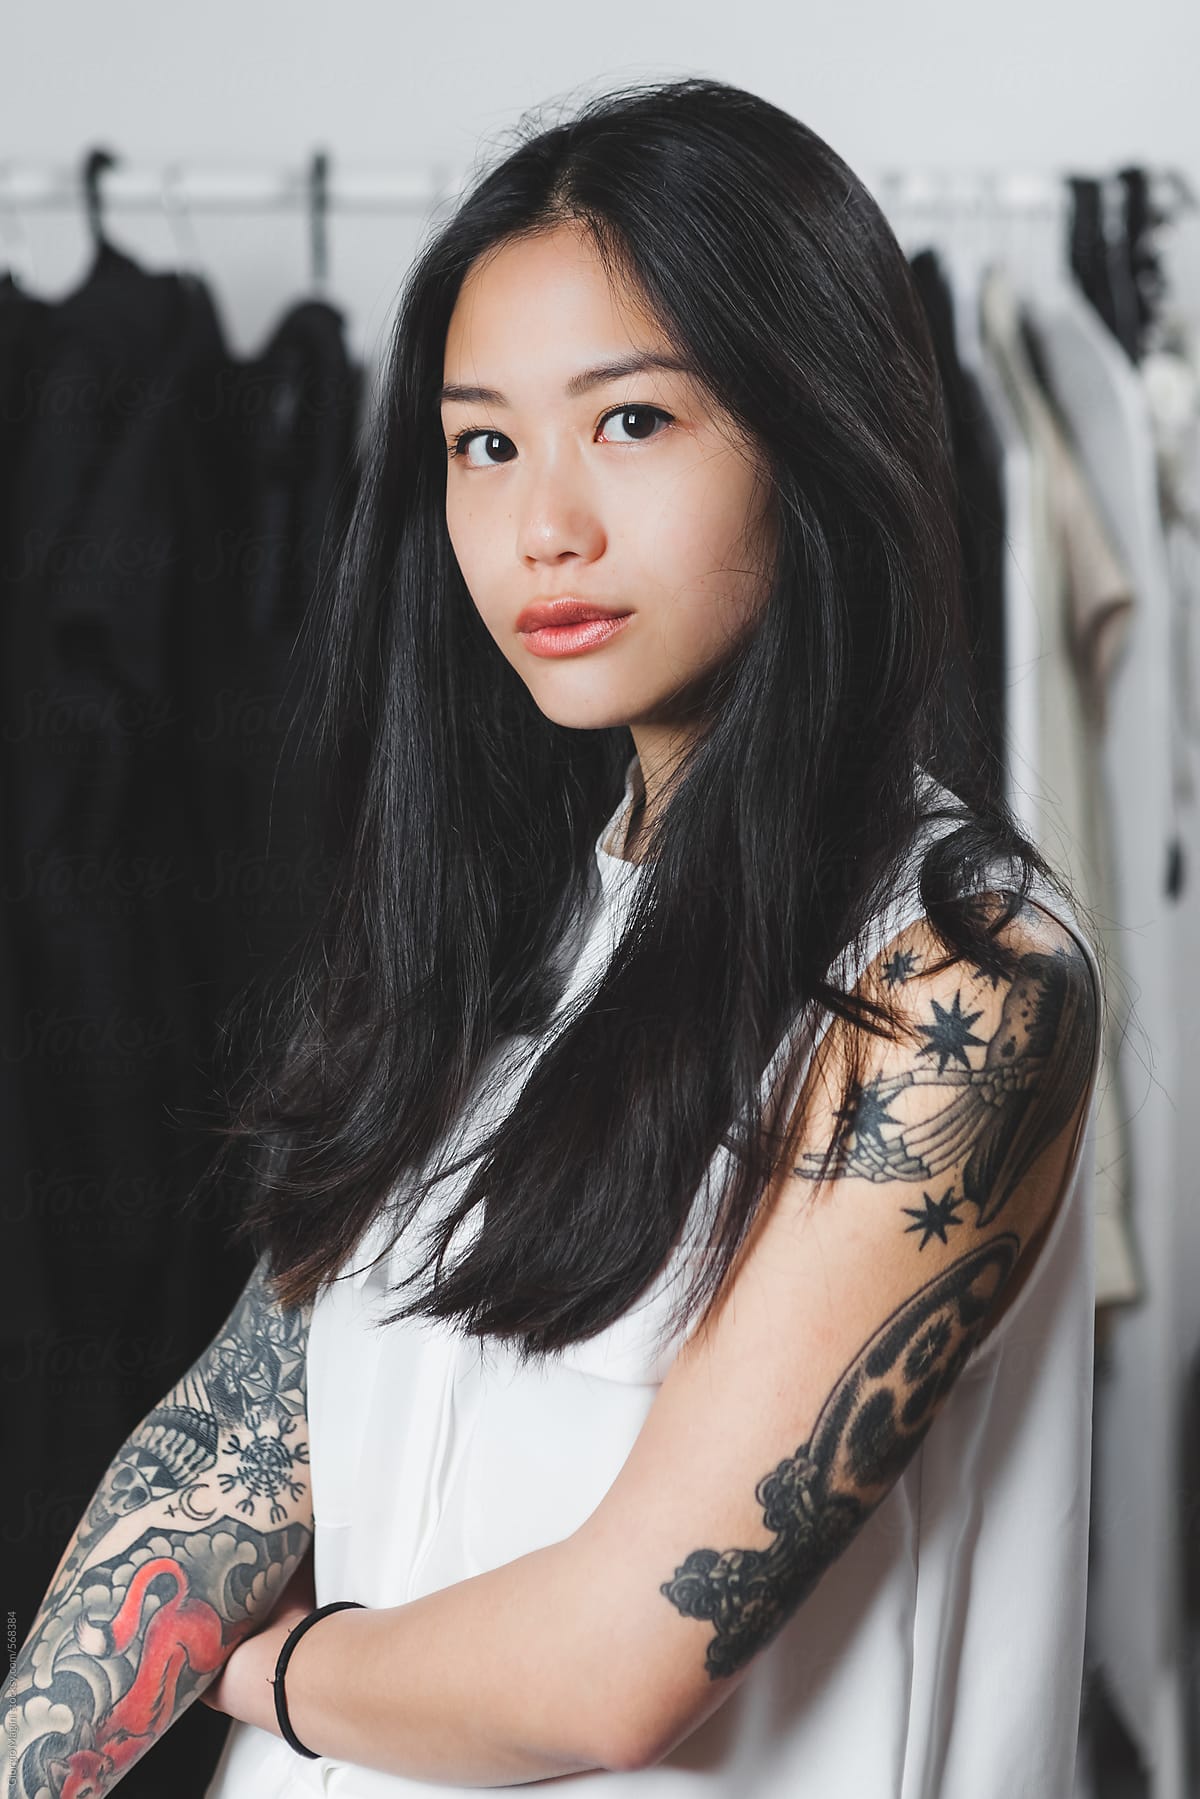 &amp;quot;Portrait Of A Young Asian Fashion Designer With Many Tattoos&amp;quot; by ...